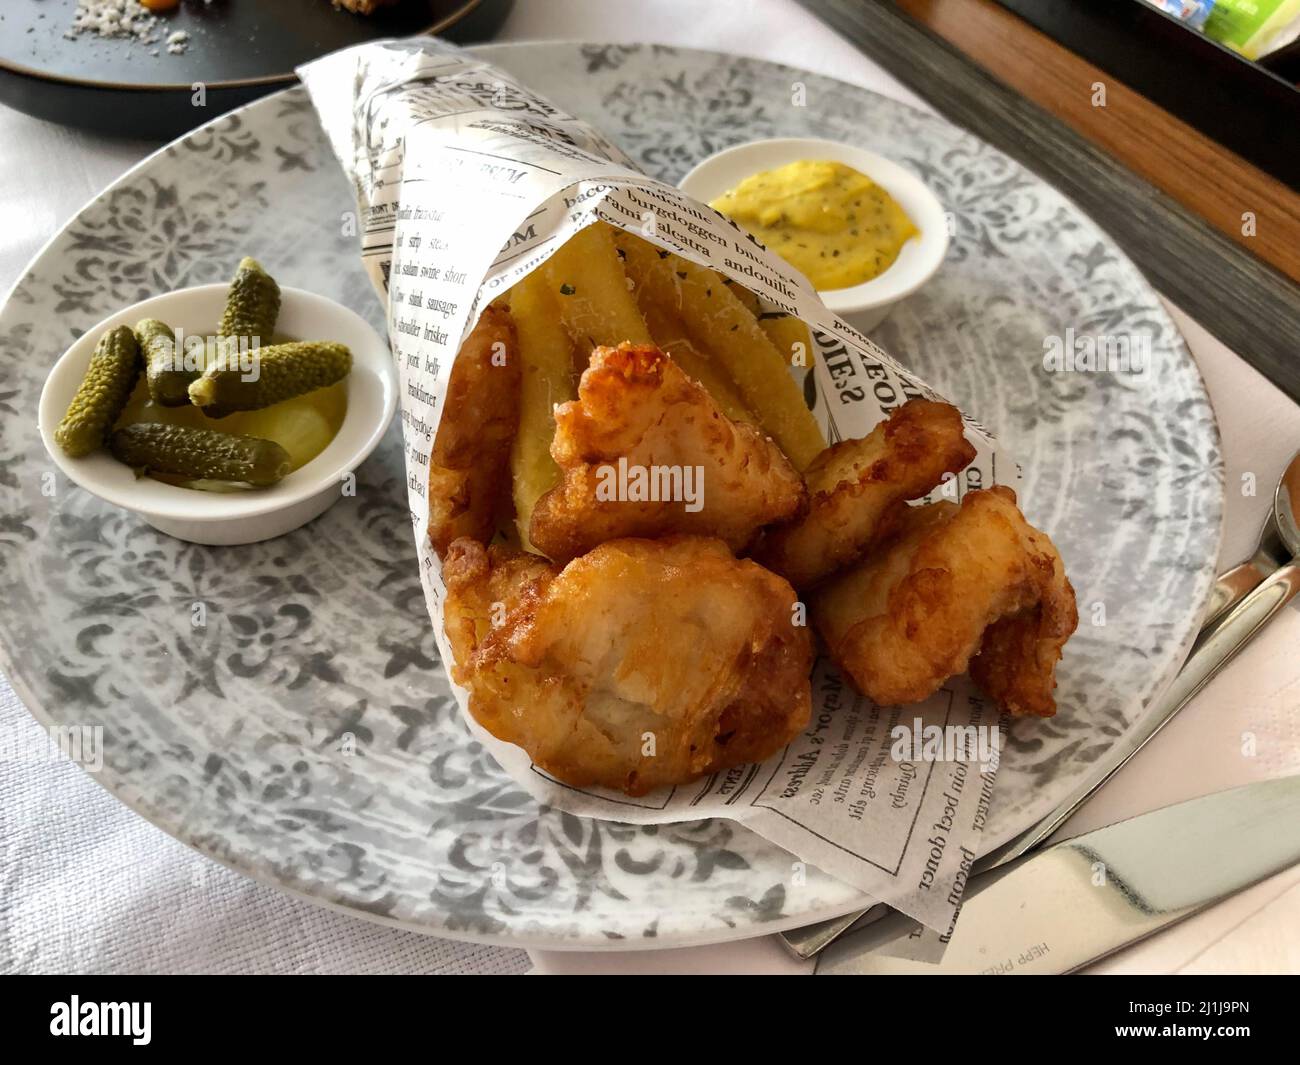 Fish and chips on a plate Stock Photo